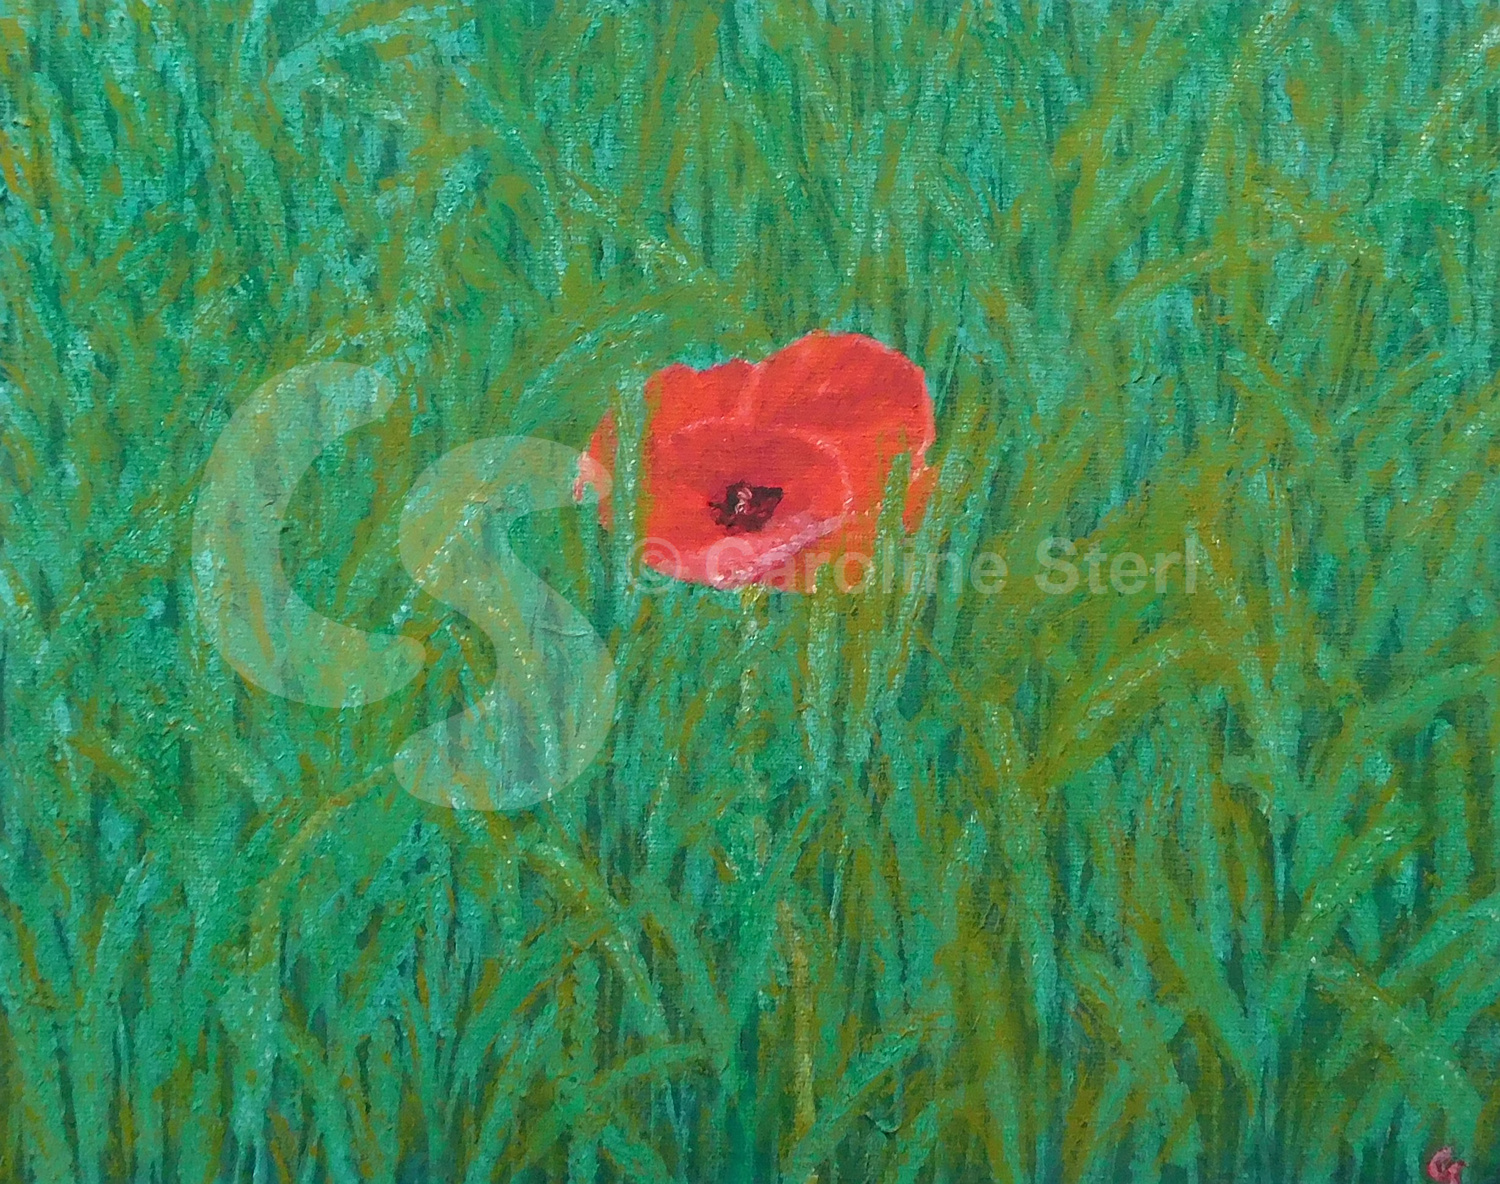 Painting: Just one Poppy